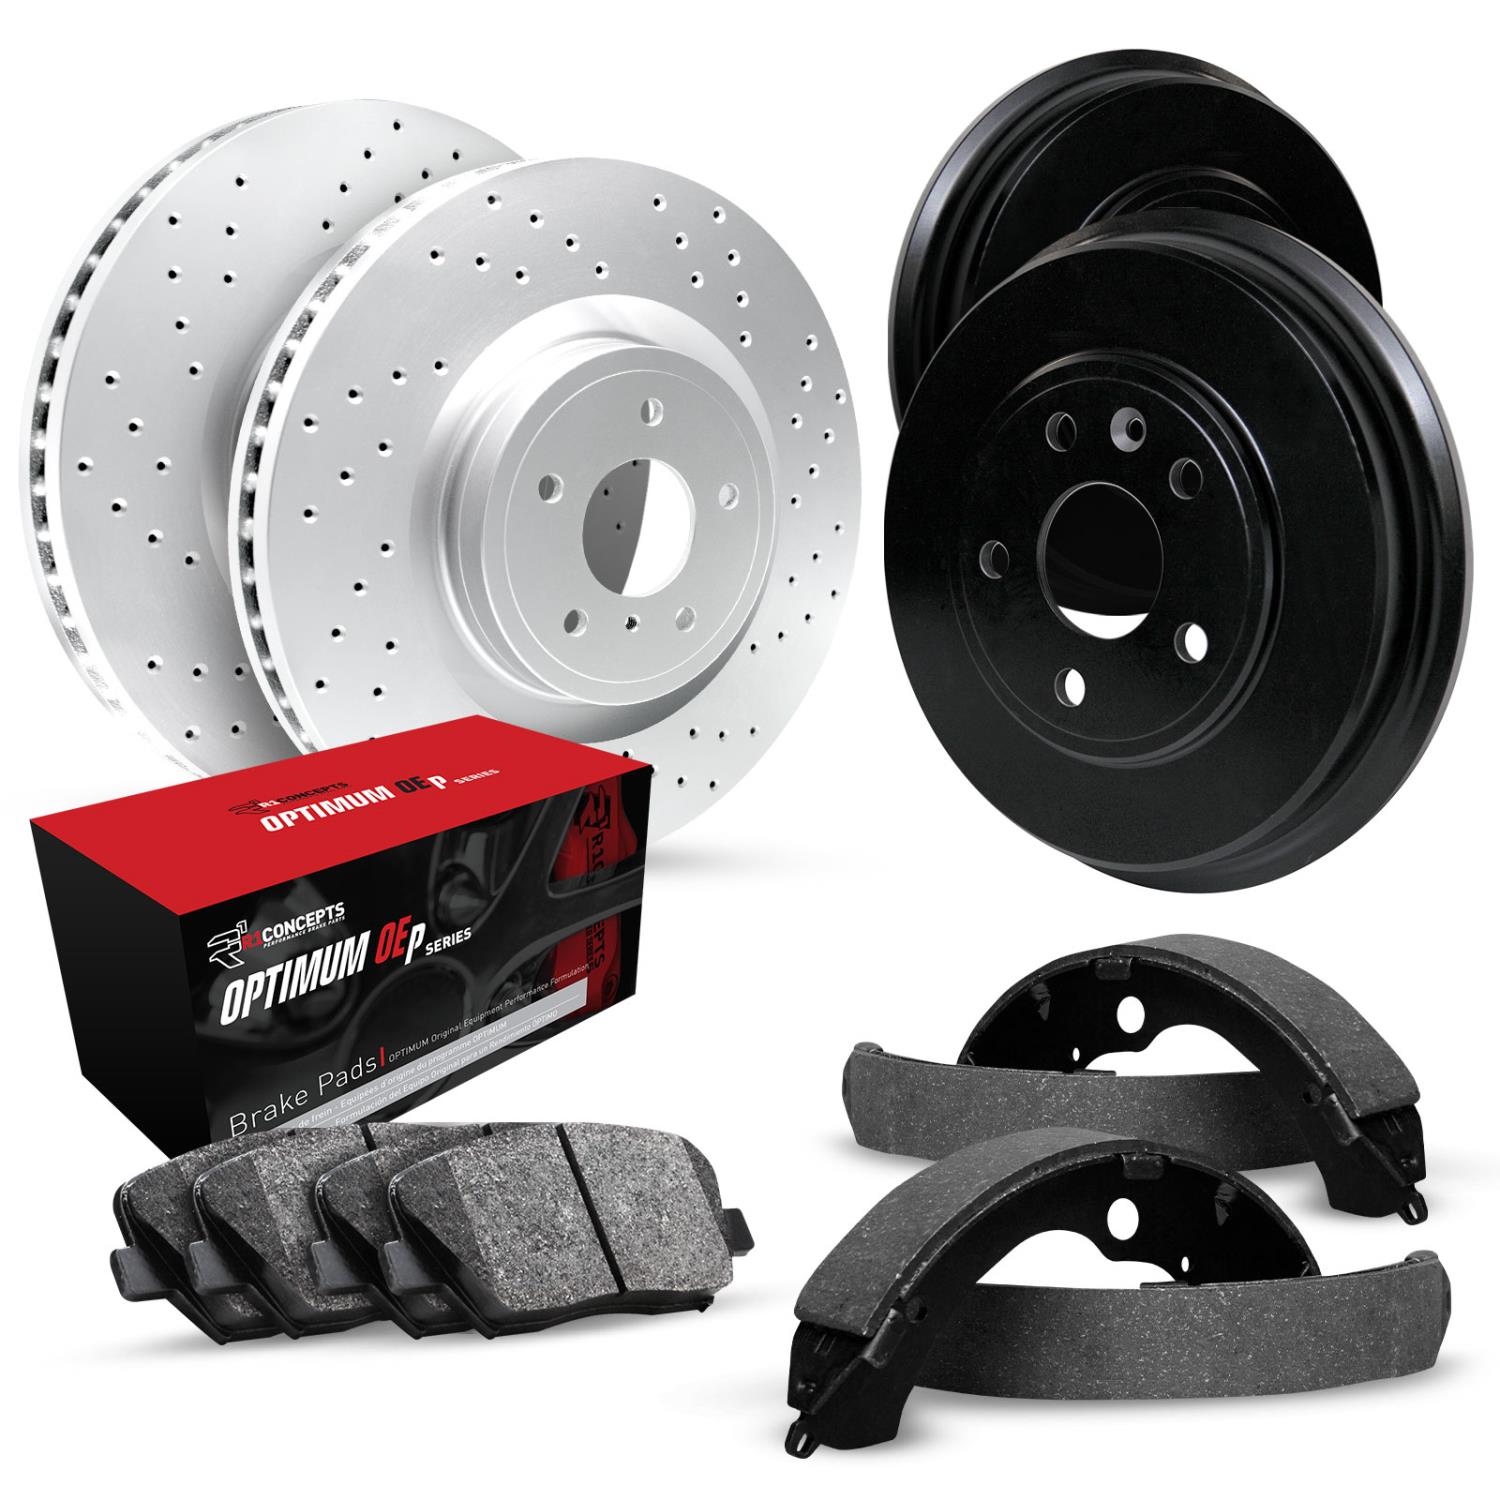 GEO-Carbon Drilled Brake Rotor & Drum Set w/Optimum OE Pads & Shoes, 1998-2004 Infiniti/Nissan, Position: Front & Rear